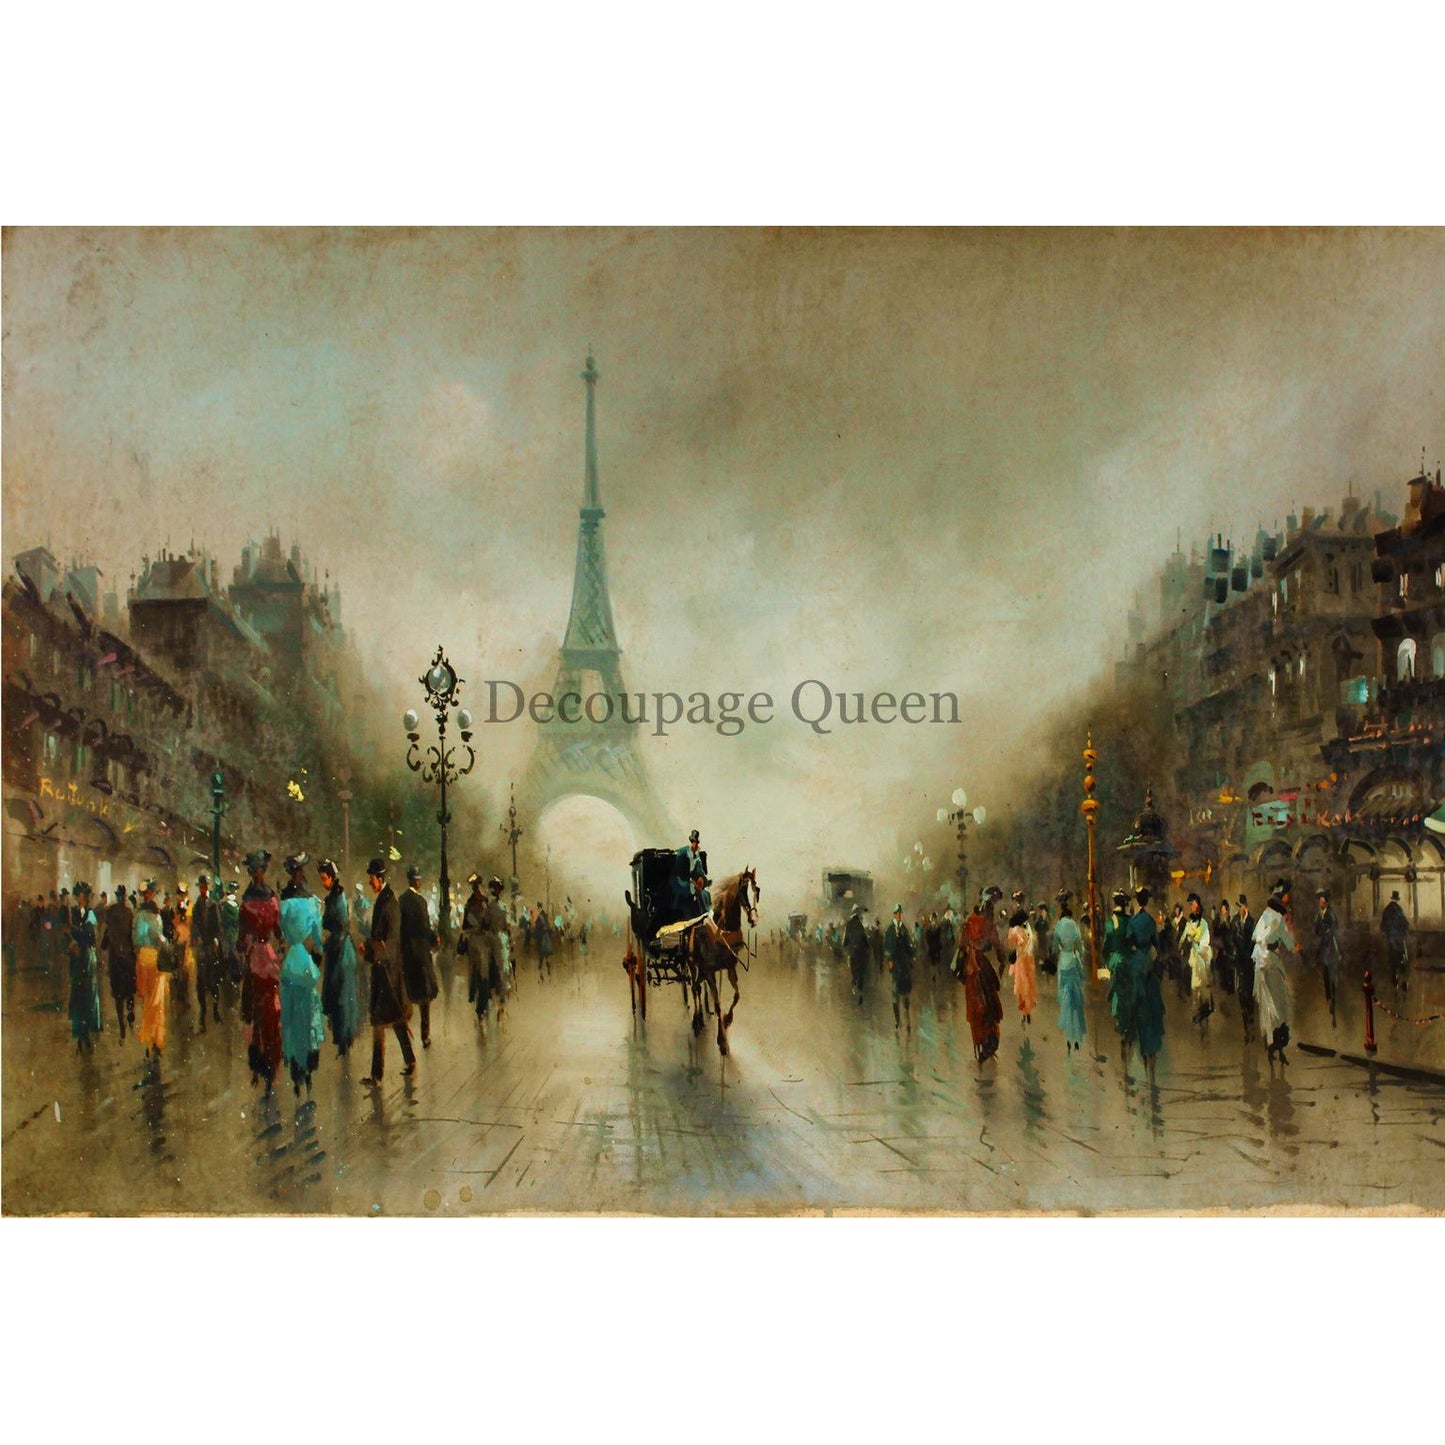 0446_A3 - Rice Paper - Decoupage Queen - Roberta Marone Once Upon a Time in Paris